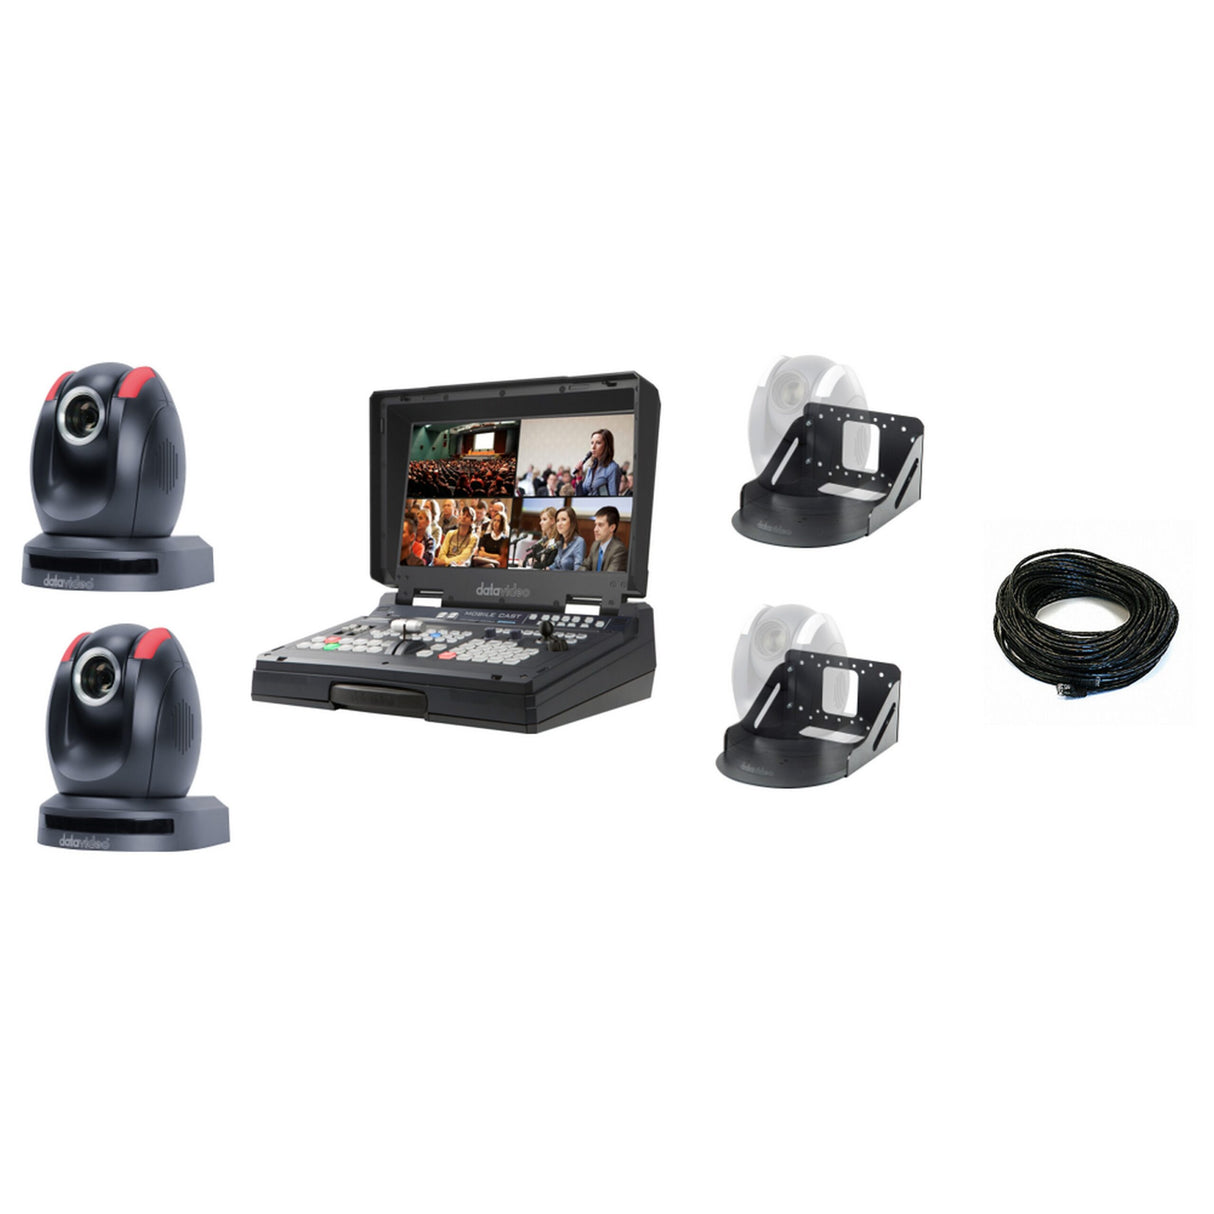 Datavideo EZ Streaming Package C1 with HS-1600T MKII and PTC-150TL PTZ Cameras